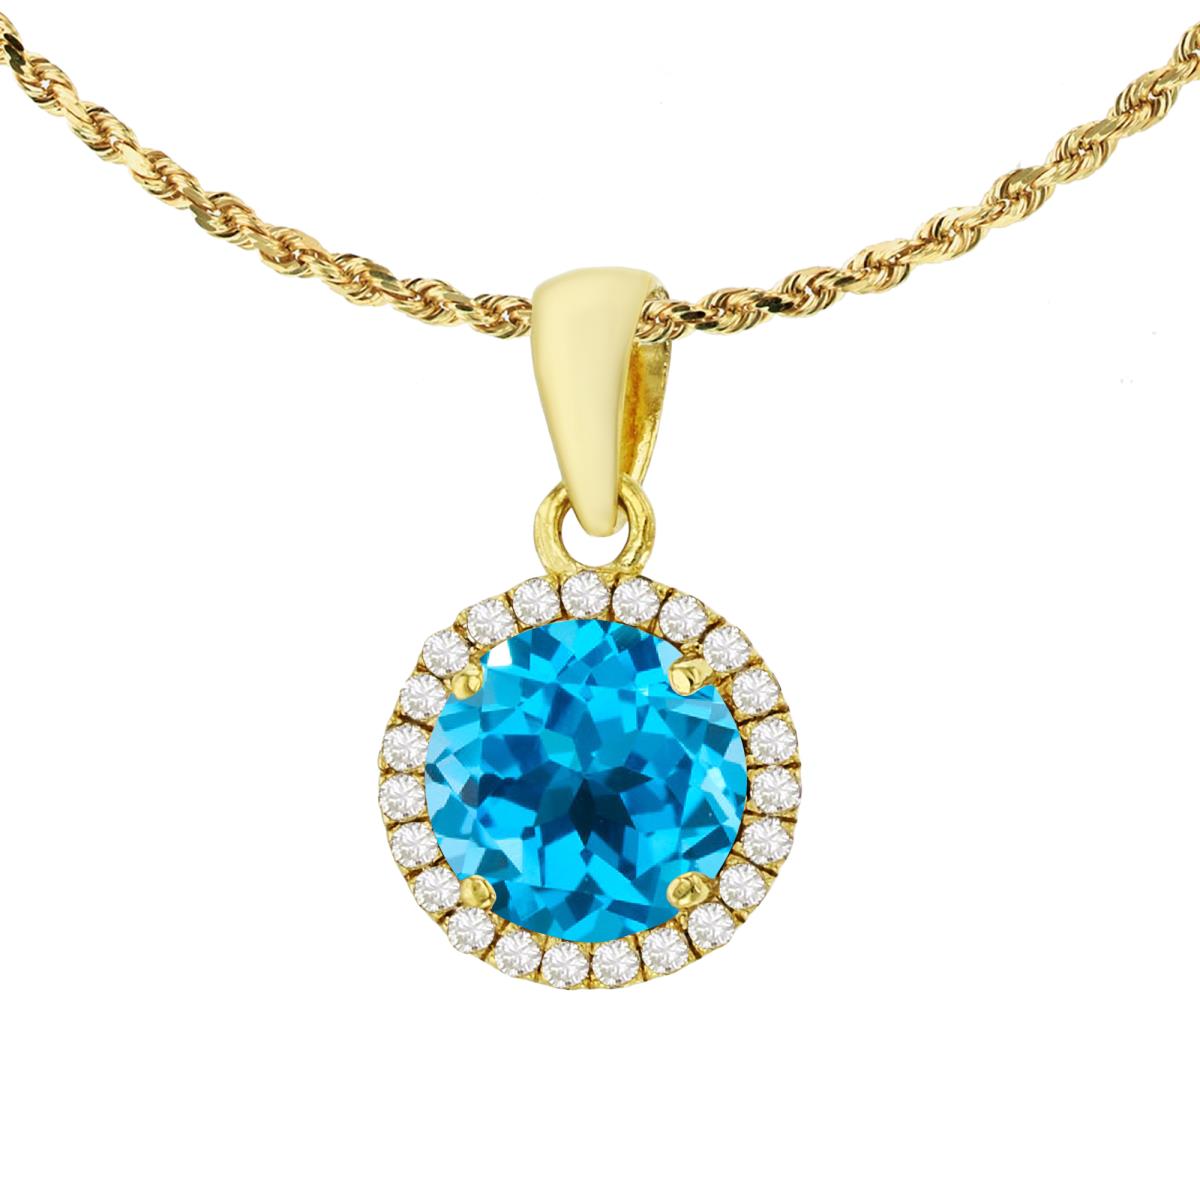 10K Yellow Gold 7mm Round Swiss Blue Topaz & 0.12 CTTW Diamond Halo 18" Rope Chain Necklace